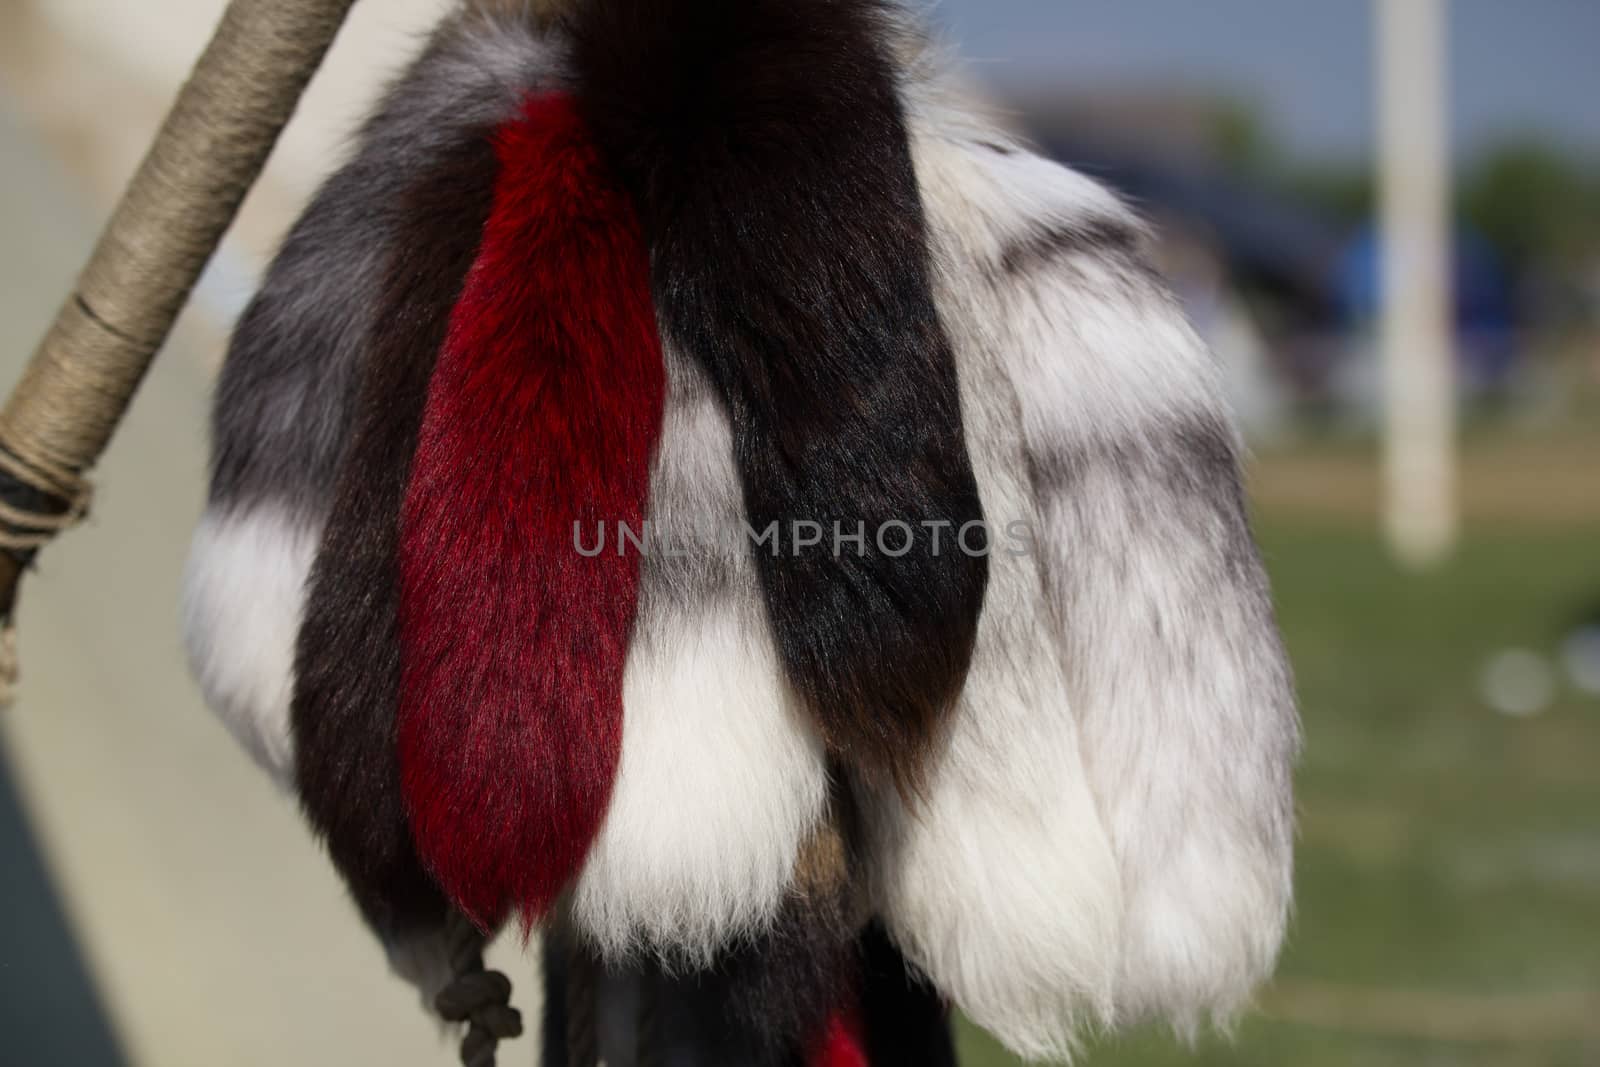 Fur products of different colors in the medieval festival in the foreground by Studia72